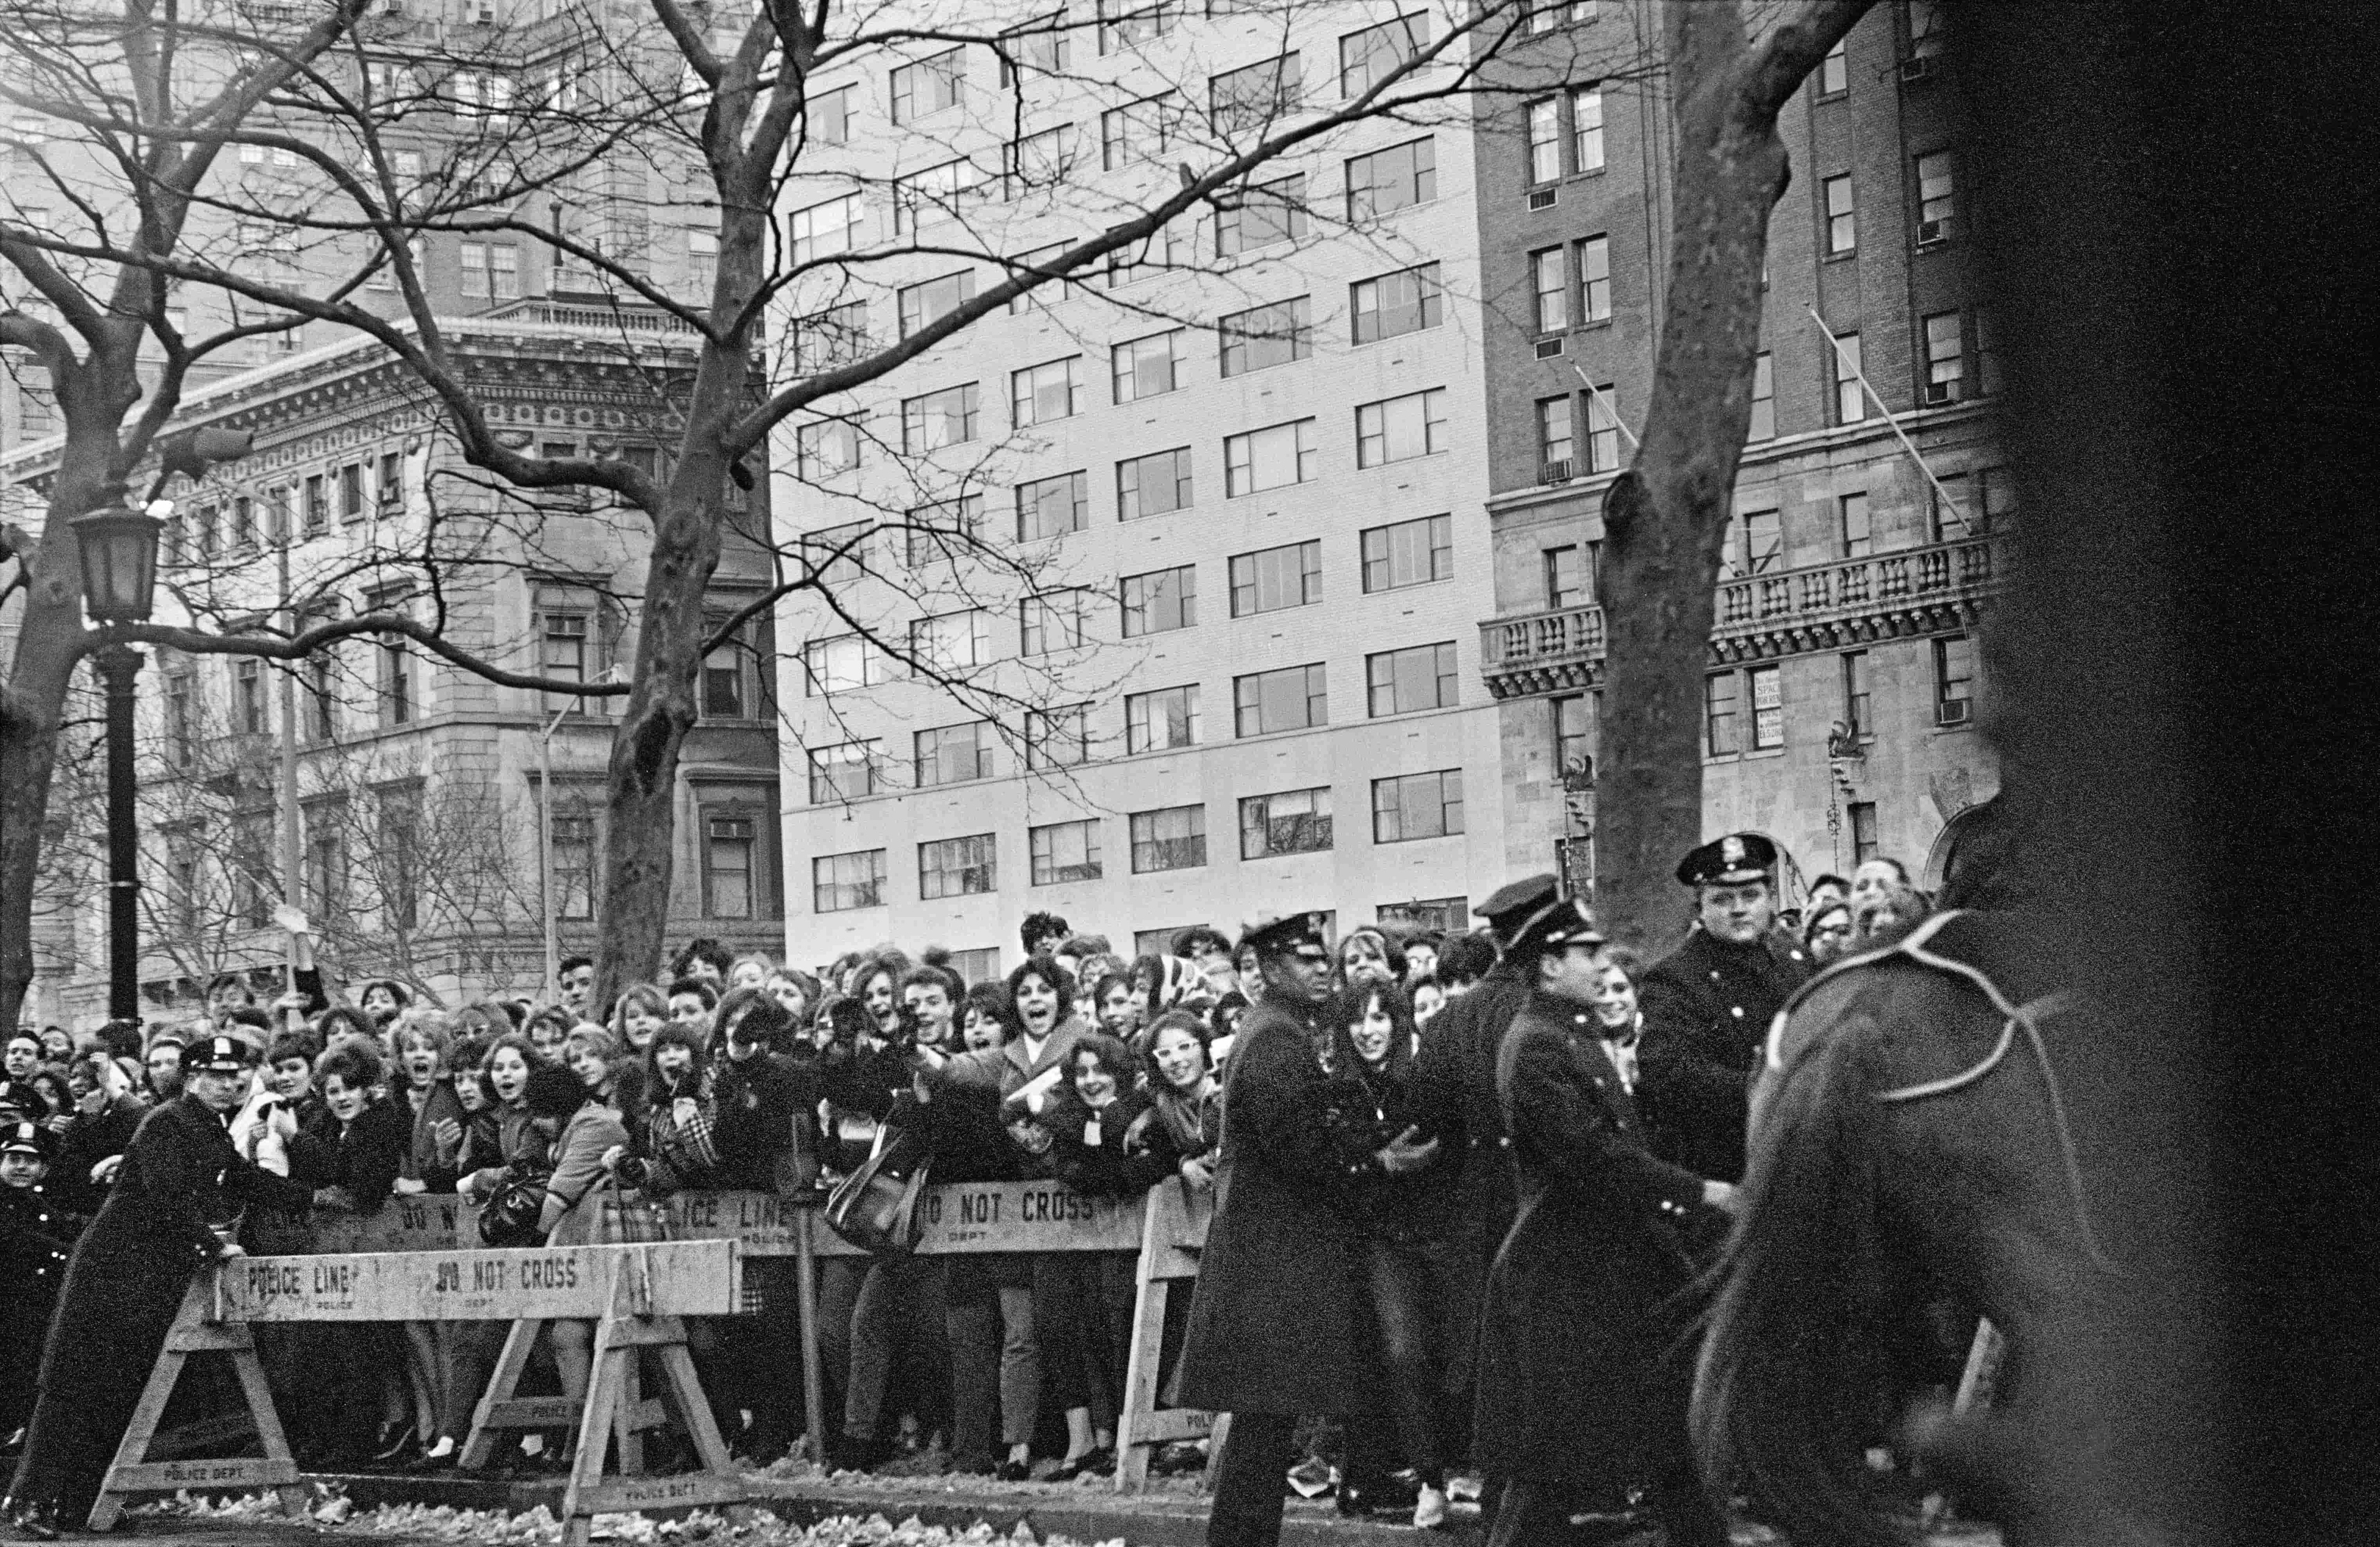 Black and white photo of a crowd of fans behind a barricade in New York's Central Park